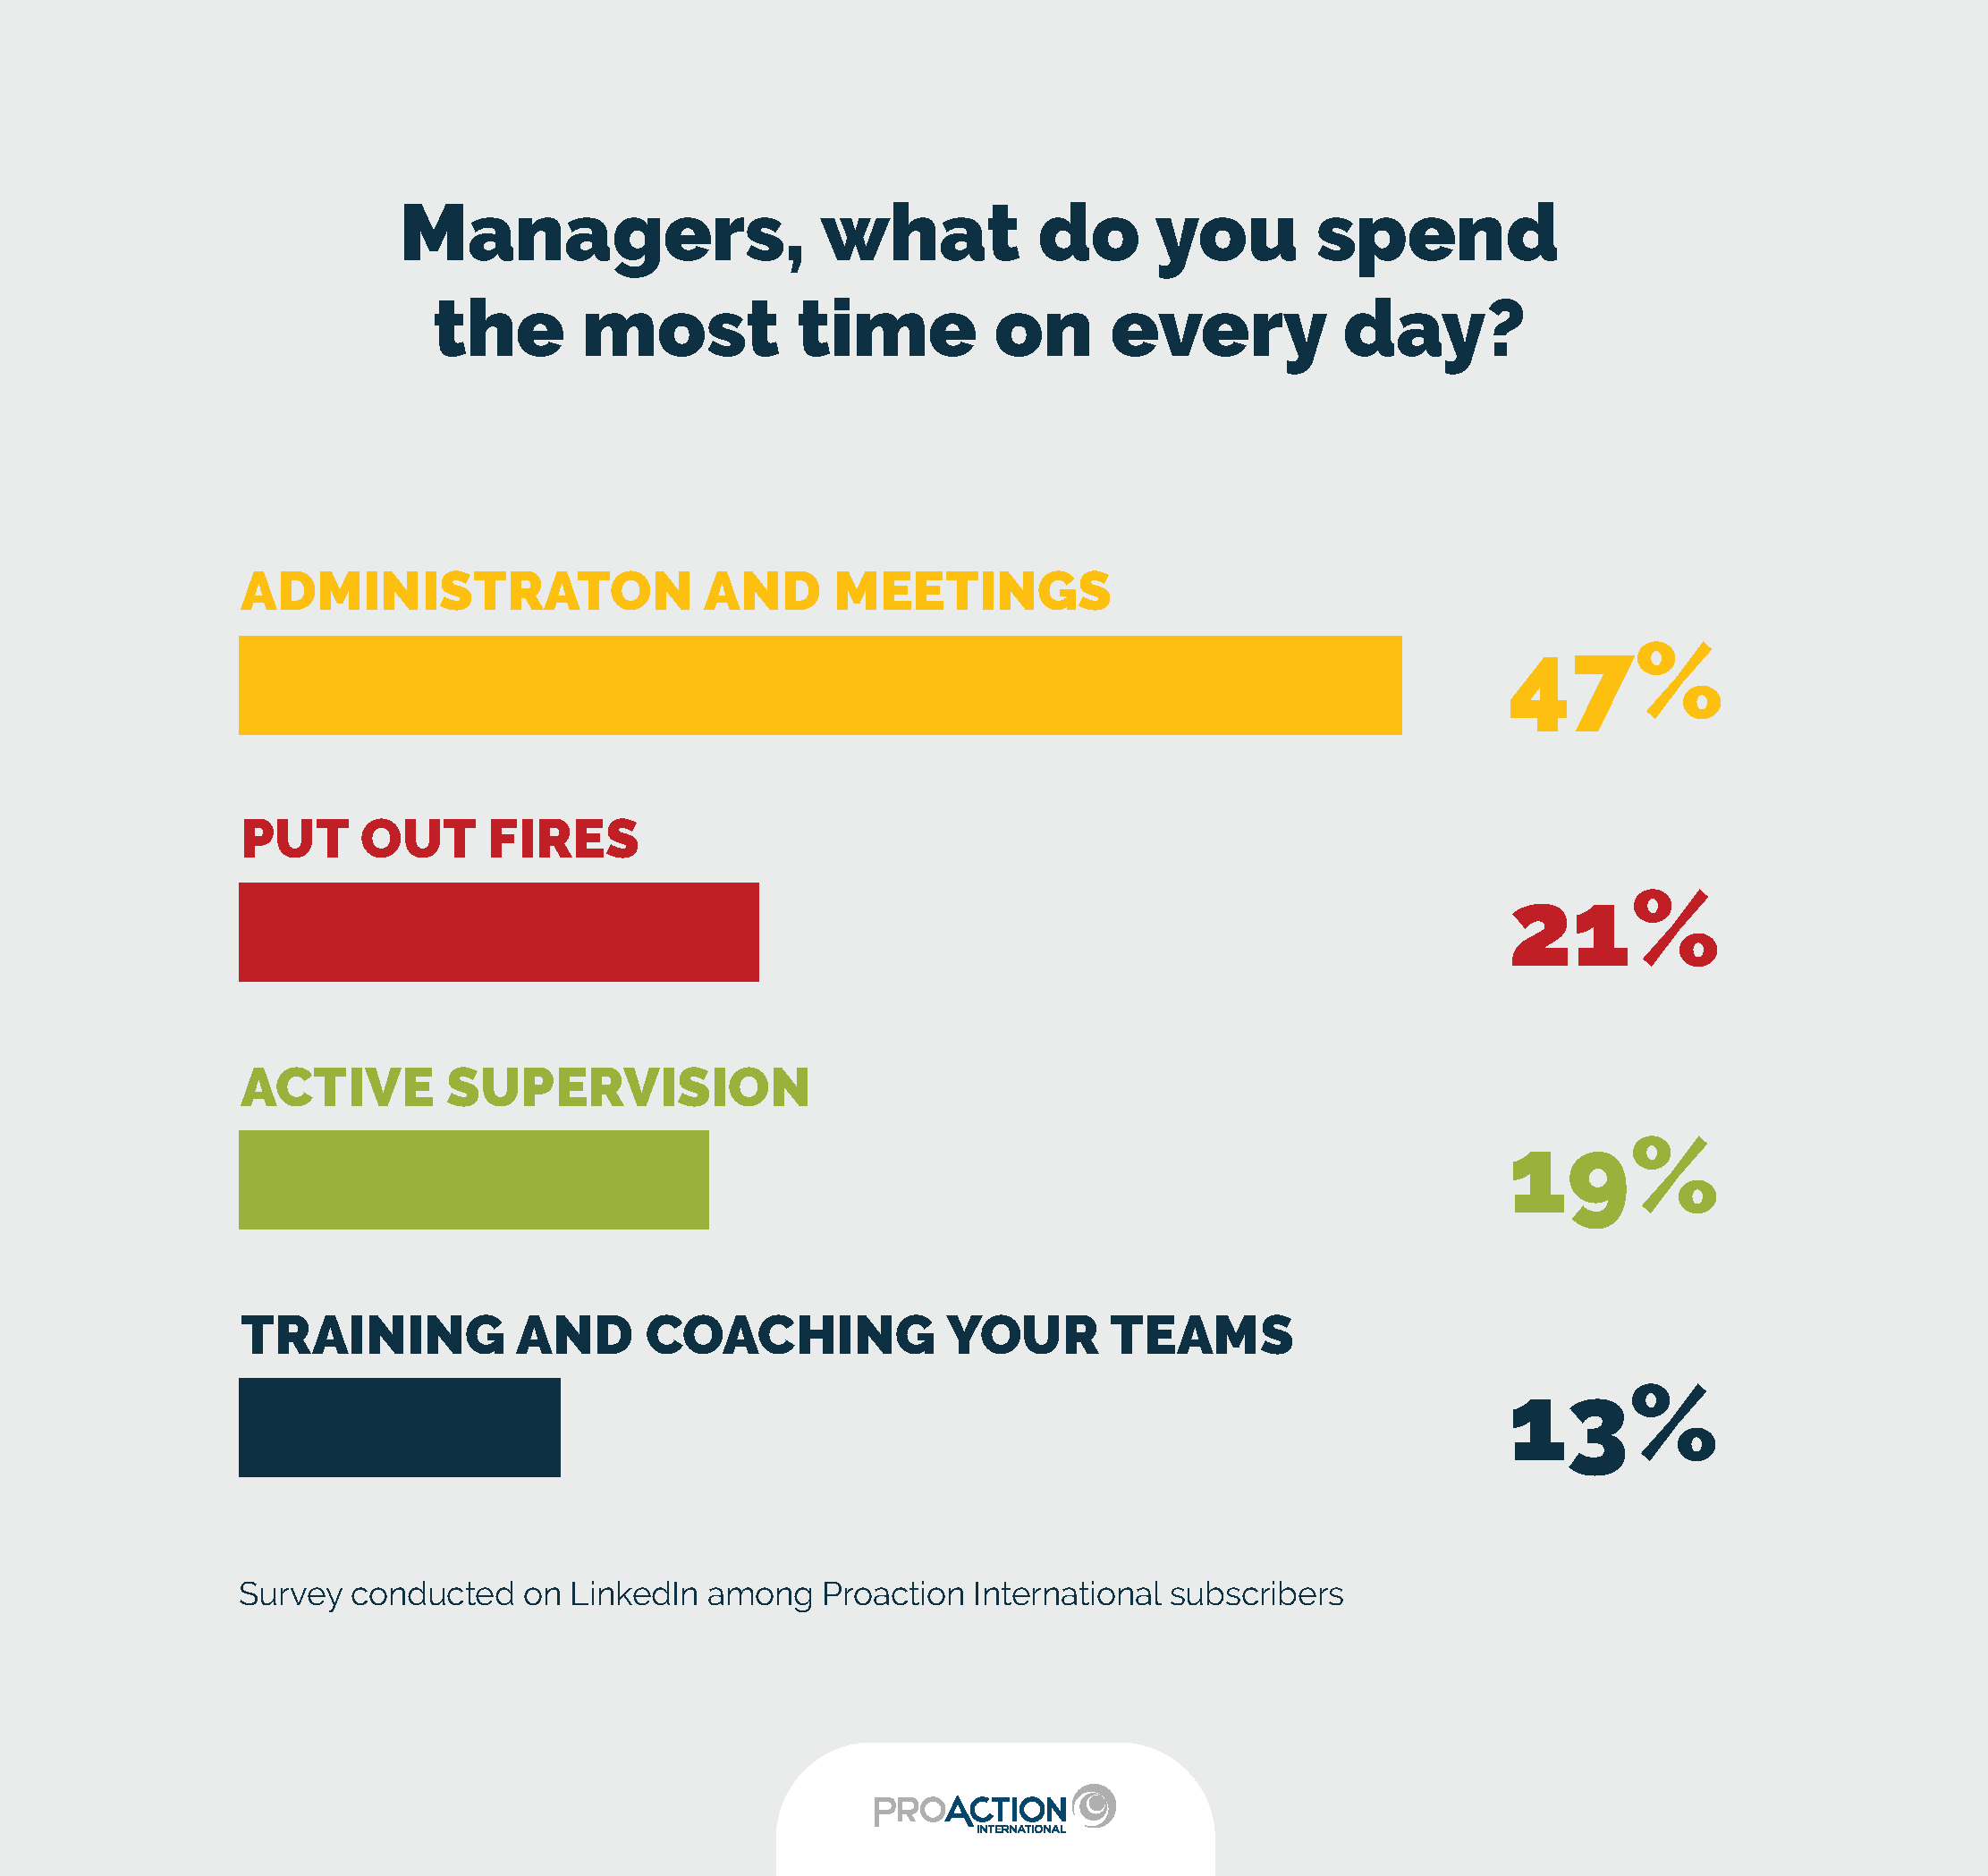 Survey Infographics_what managers spend the most time on every day : 47% administration and meetings, 21% put out fires, 19% active supervision, 13% training and coaching teams. Survey conducted on LinkedIn among Proaction International subscribers